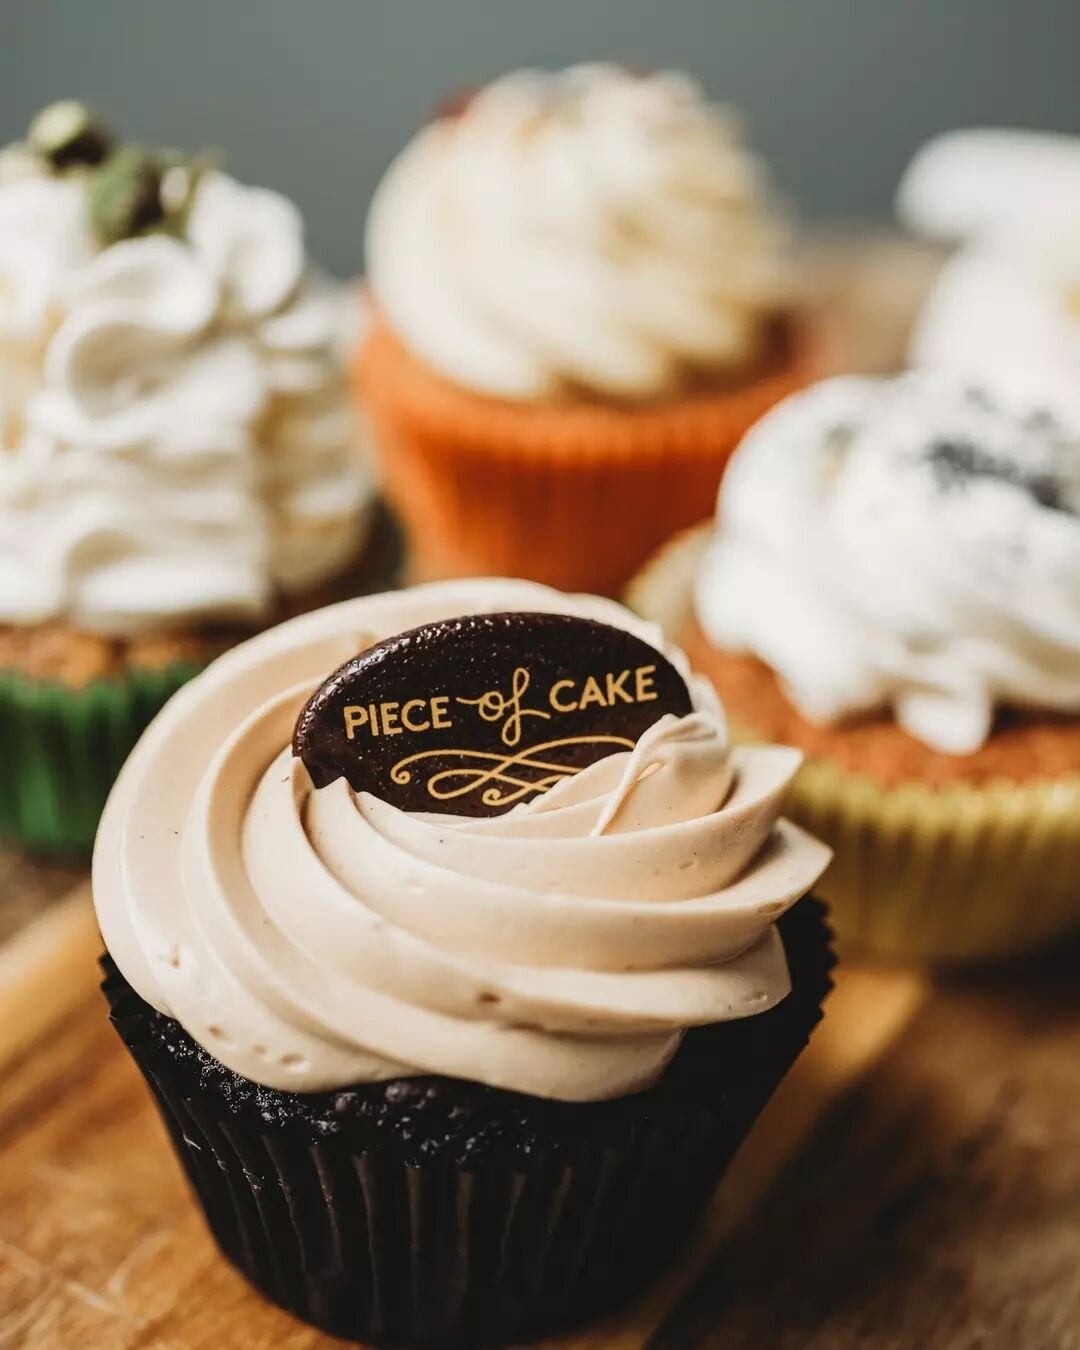 Our signature cupcake!&nbsp;🧡🧁
Because a chocolate cupcake with coffee flavour and hazelnut praline never gets old!

Have you tried it yet?